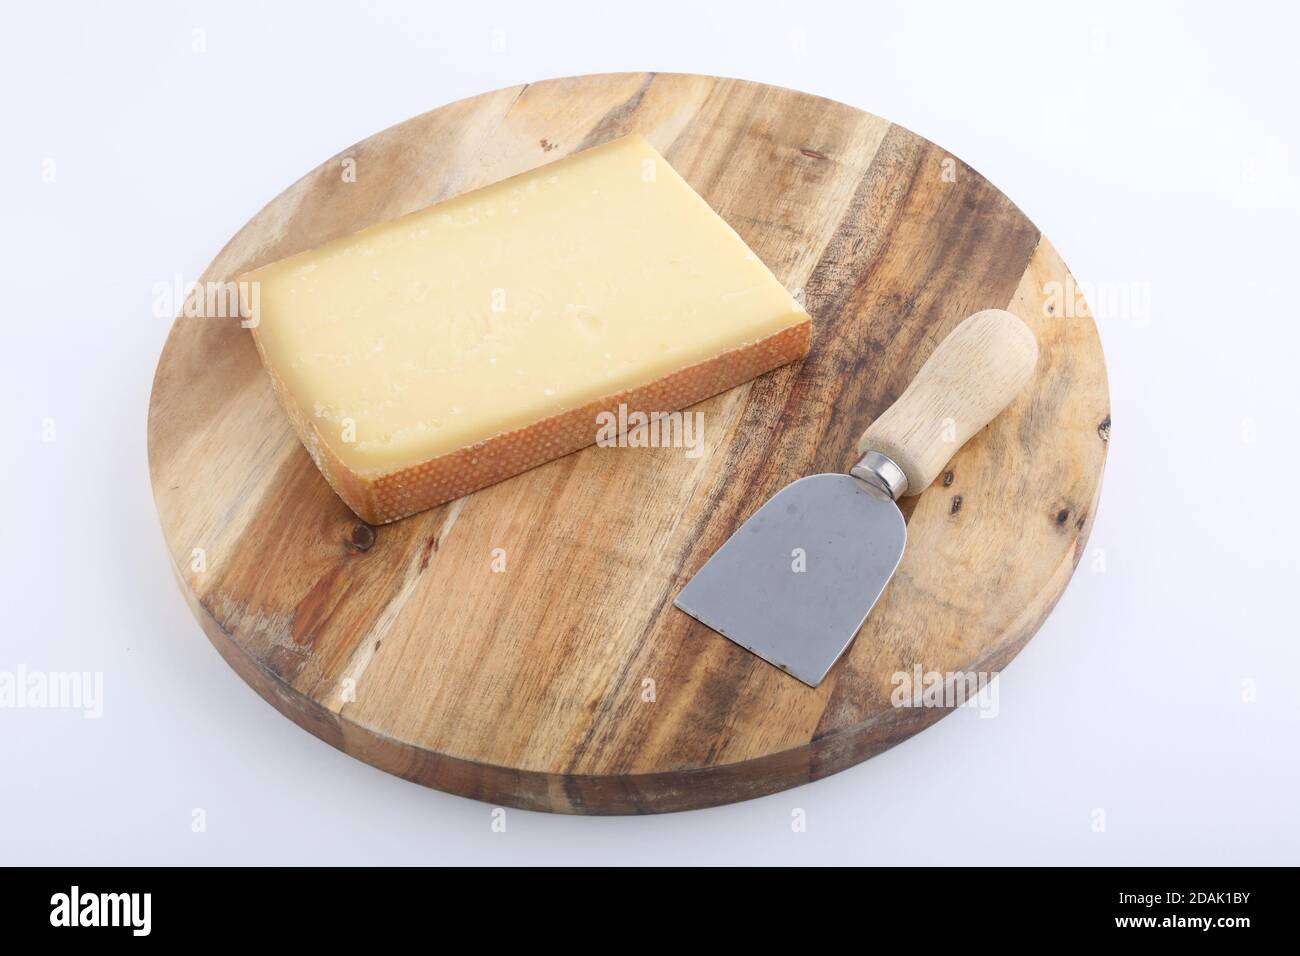 swiss gruyere cow cheese as delicacy gourmet food Stock Photo